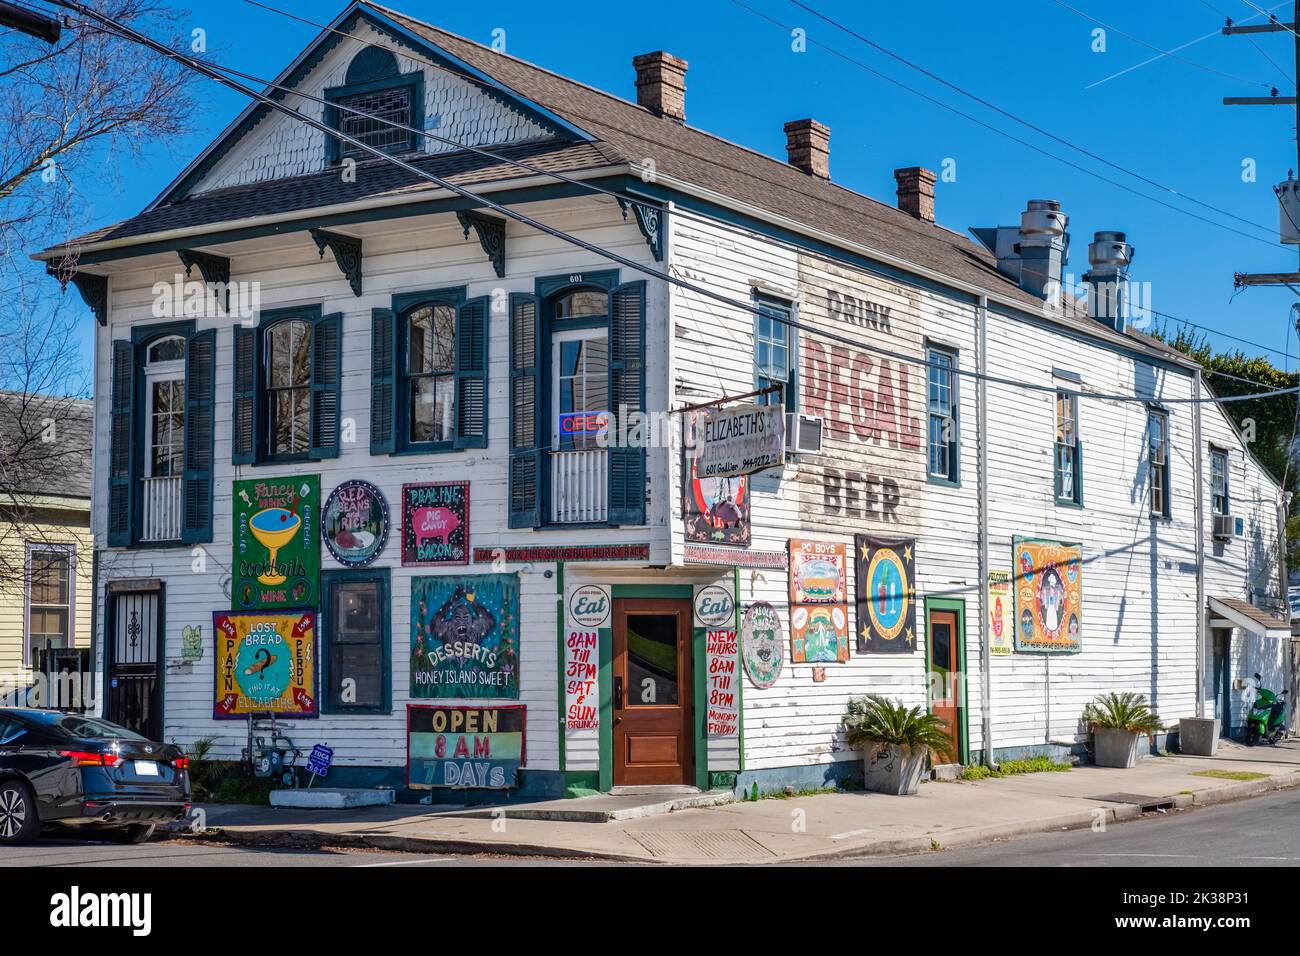 NEW ORLEANS, LA, USA - FEBRUARY 3, 2020 - Full view of popular Elizabeth's Restaurant in the Bywater neighborhood of New Orleans, Louisiana Stock Photo